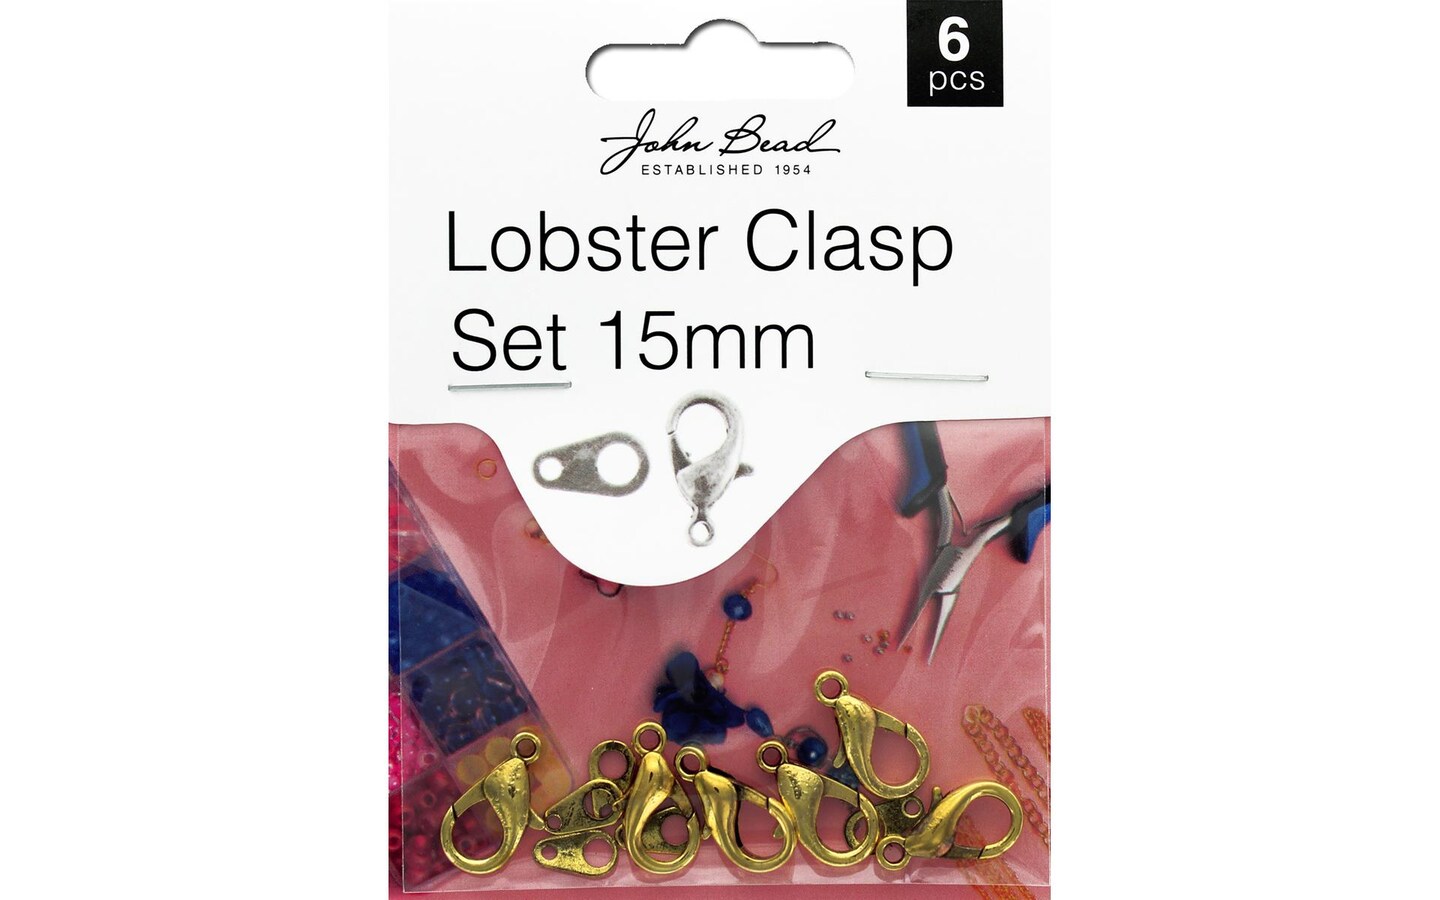 John Bead MHF Lobster Clasp Set 15mm A Gold 6pc